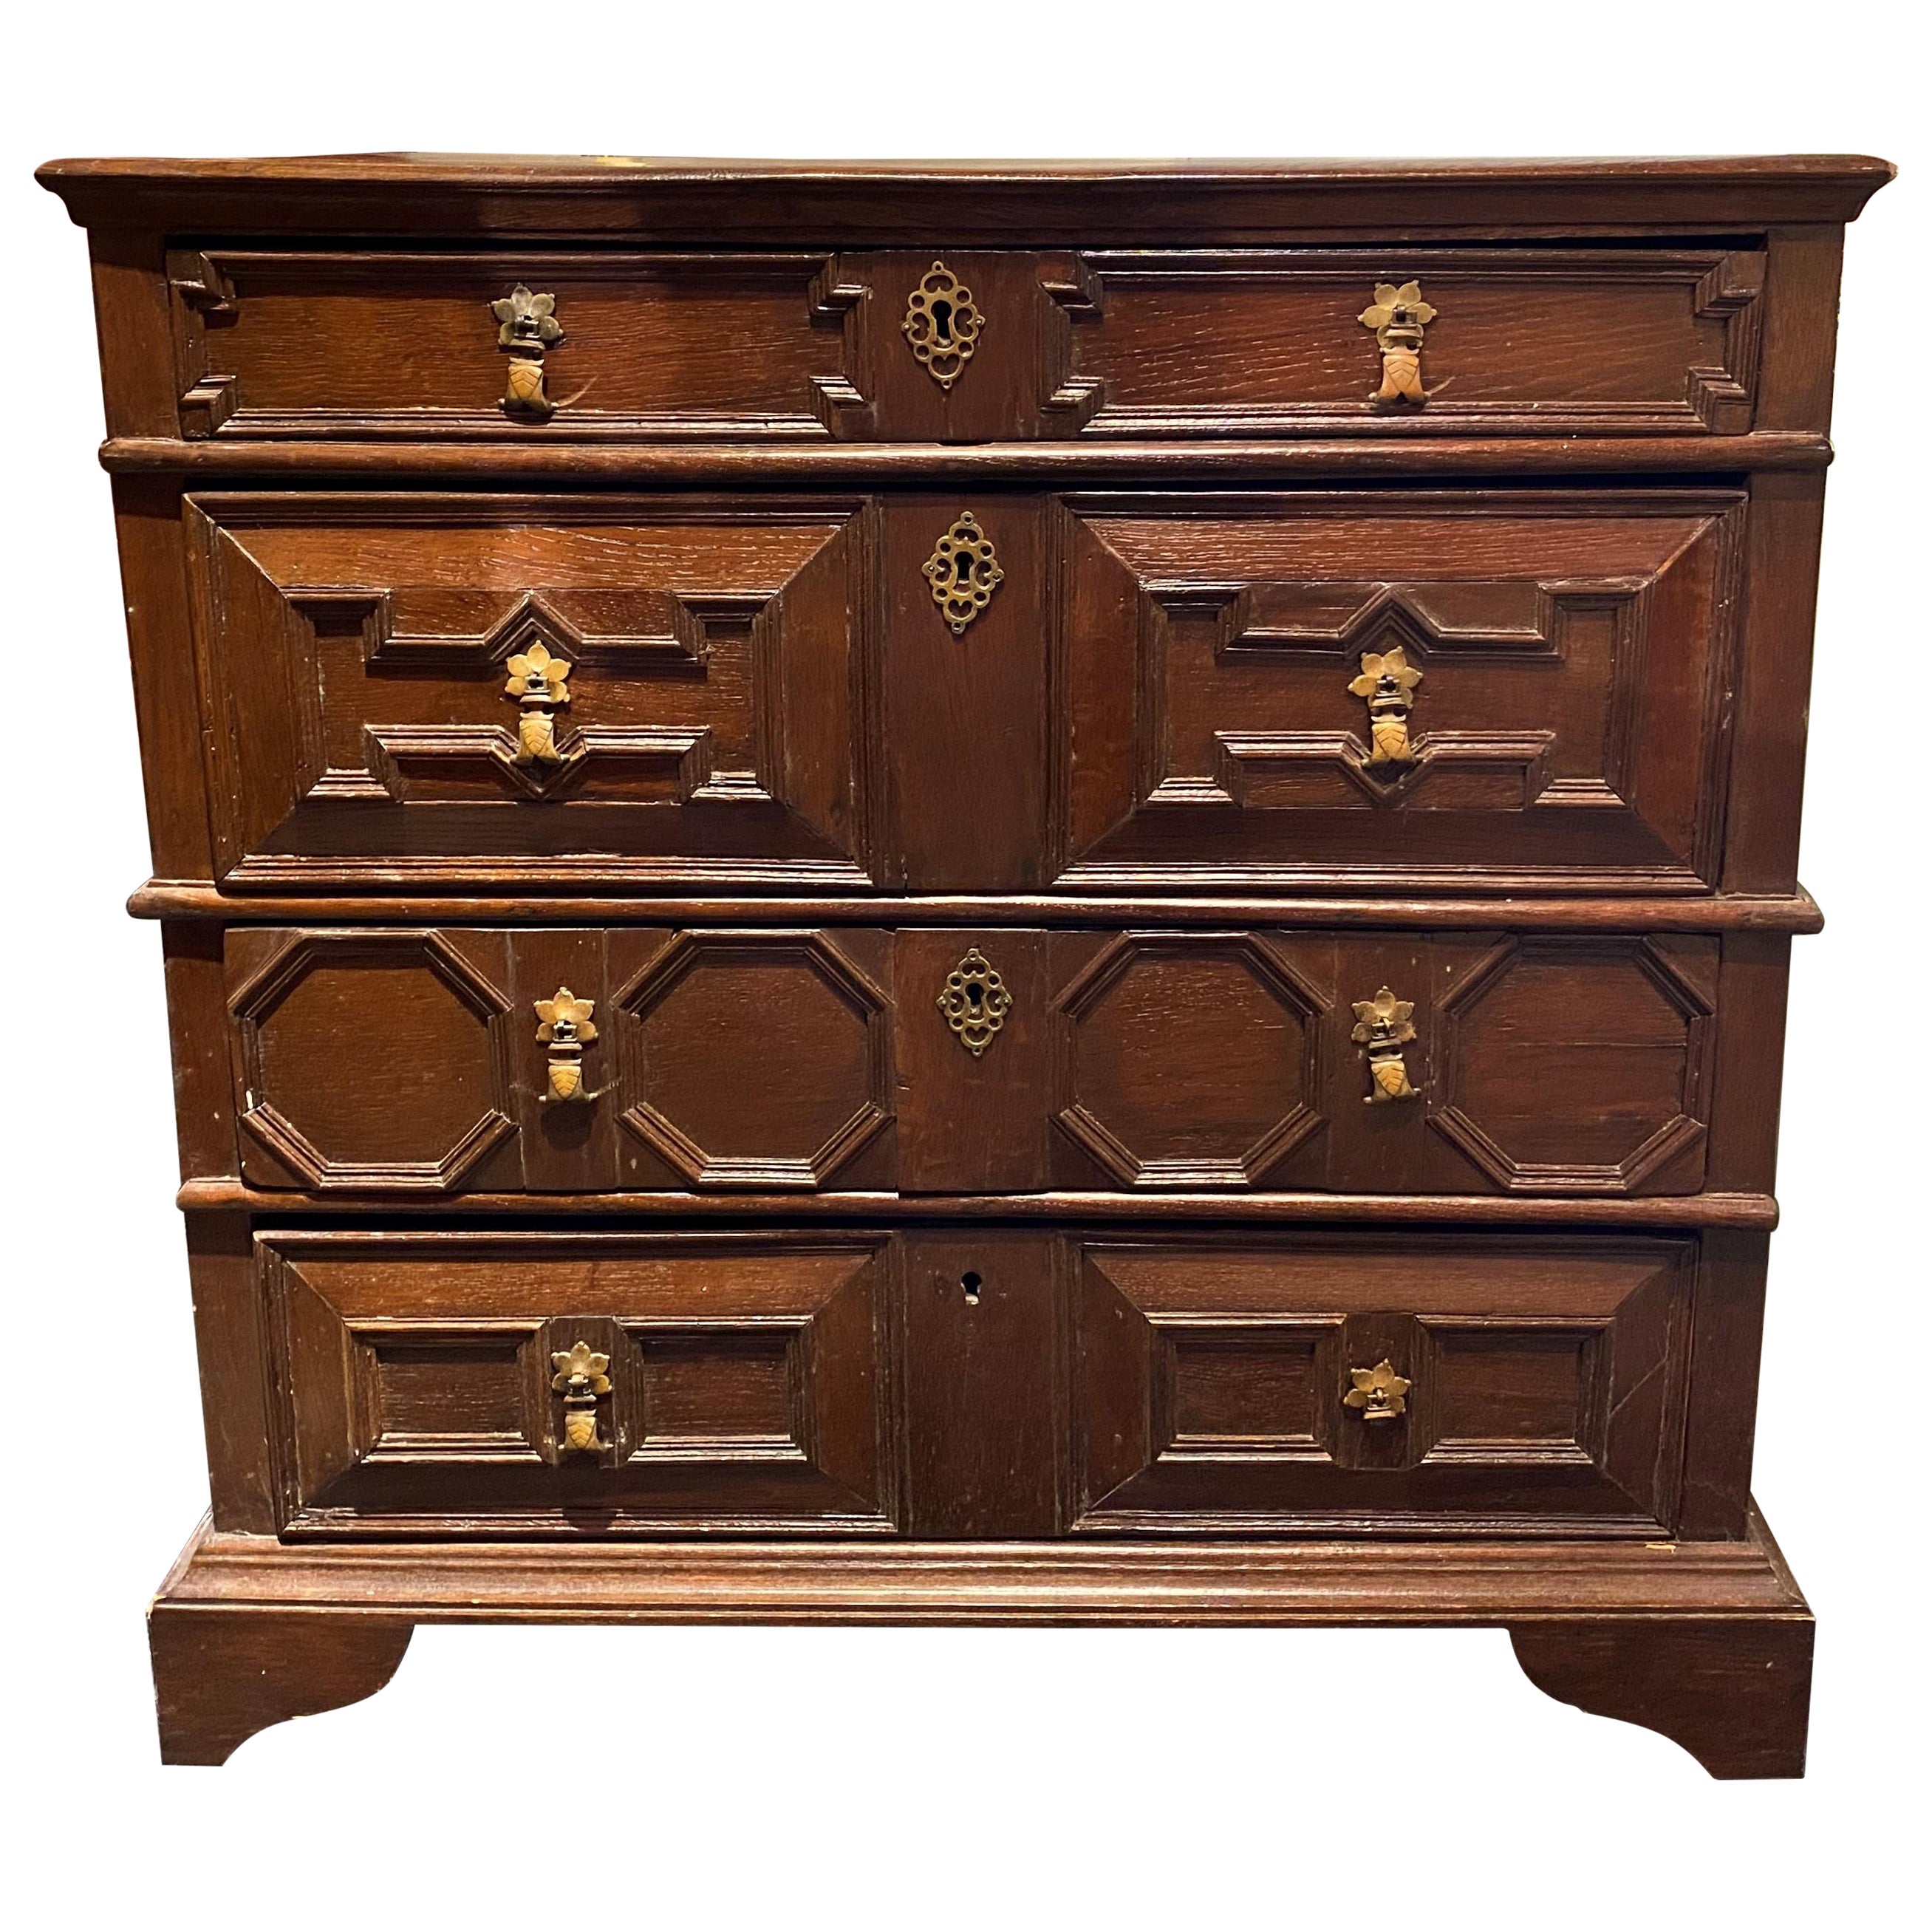 Early 18th Century English William & Mary Oak Paneled Four Drawer Chest